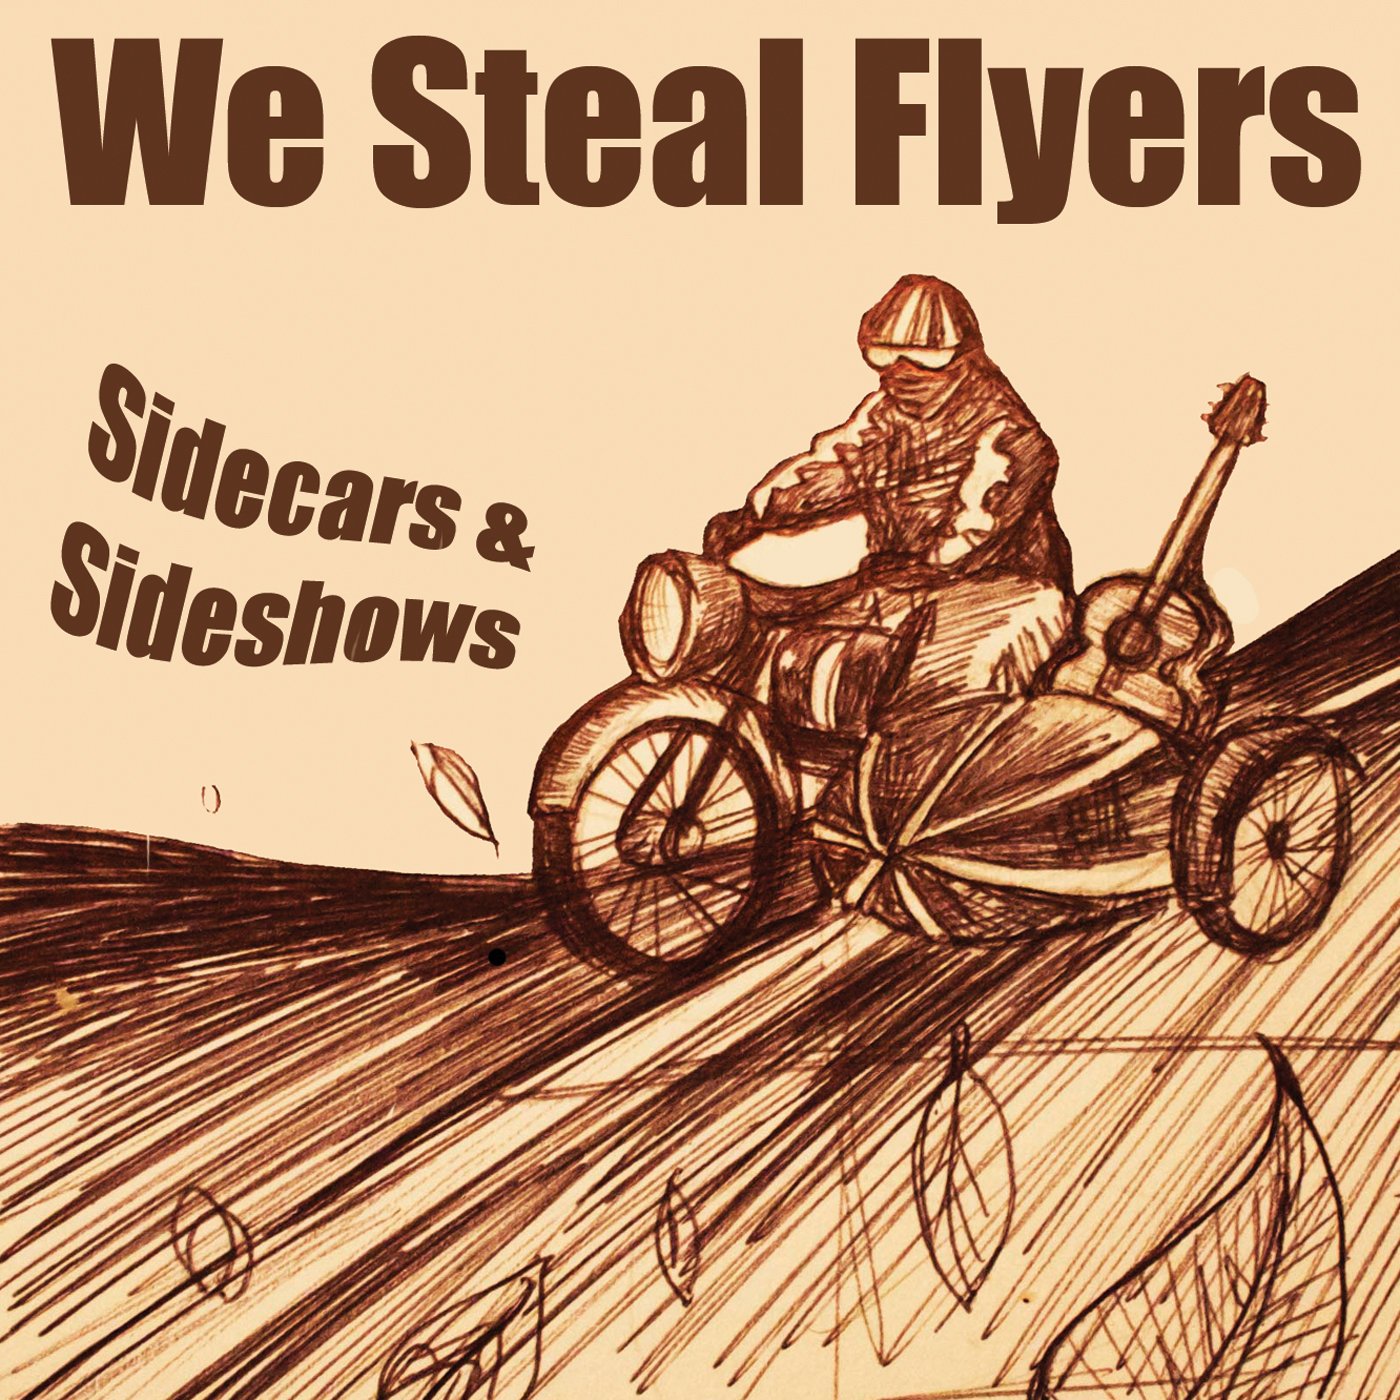  We Steal Flyers – Sidecars & Sideshows